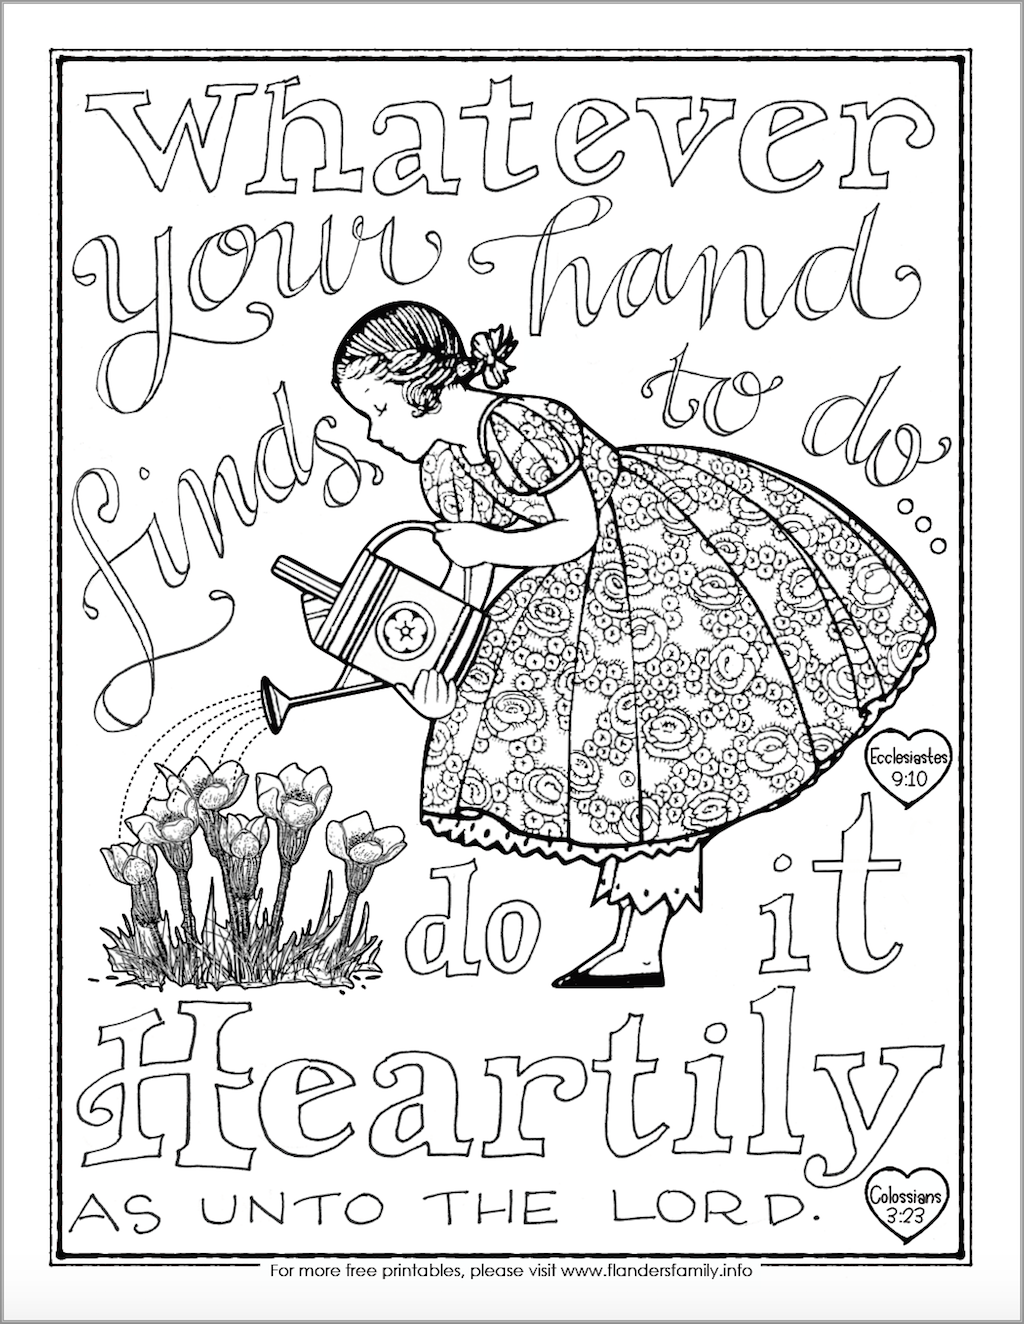 Do Your Work Heartily Coloring Page ...flandersfamily.info